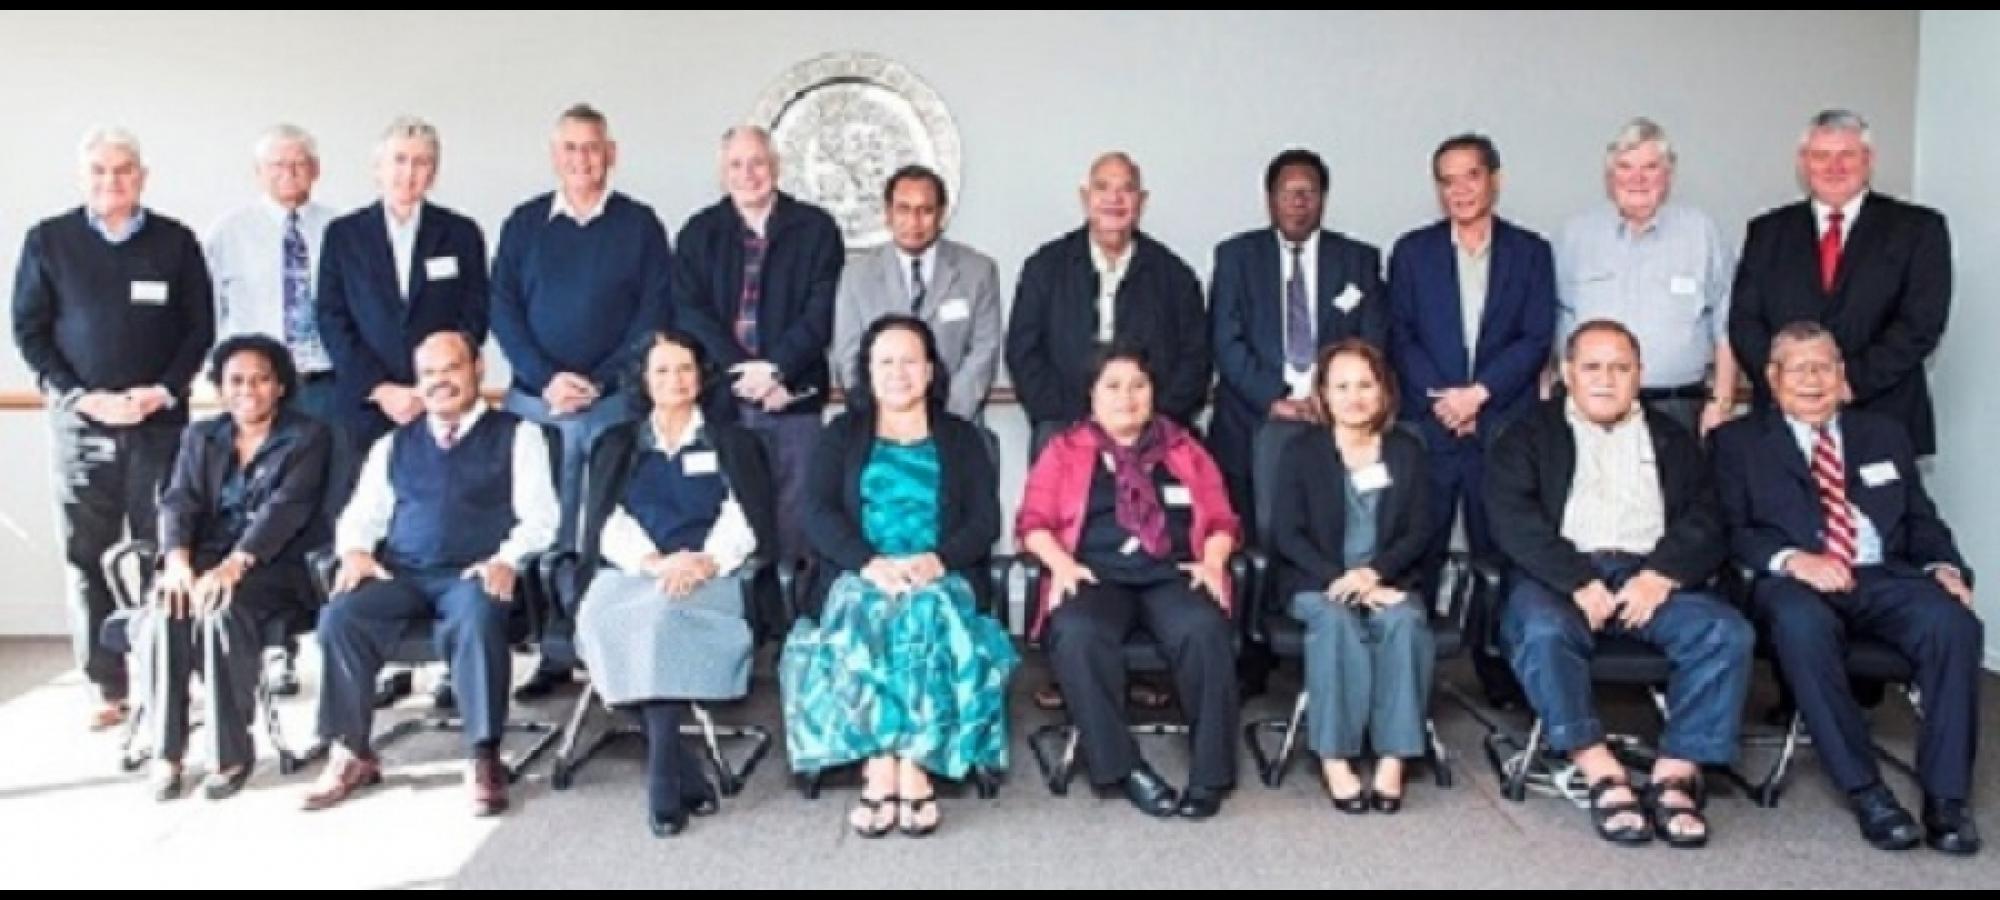 Pacific judges and magistrates consultation focuses on human rights issues in the region